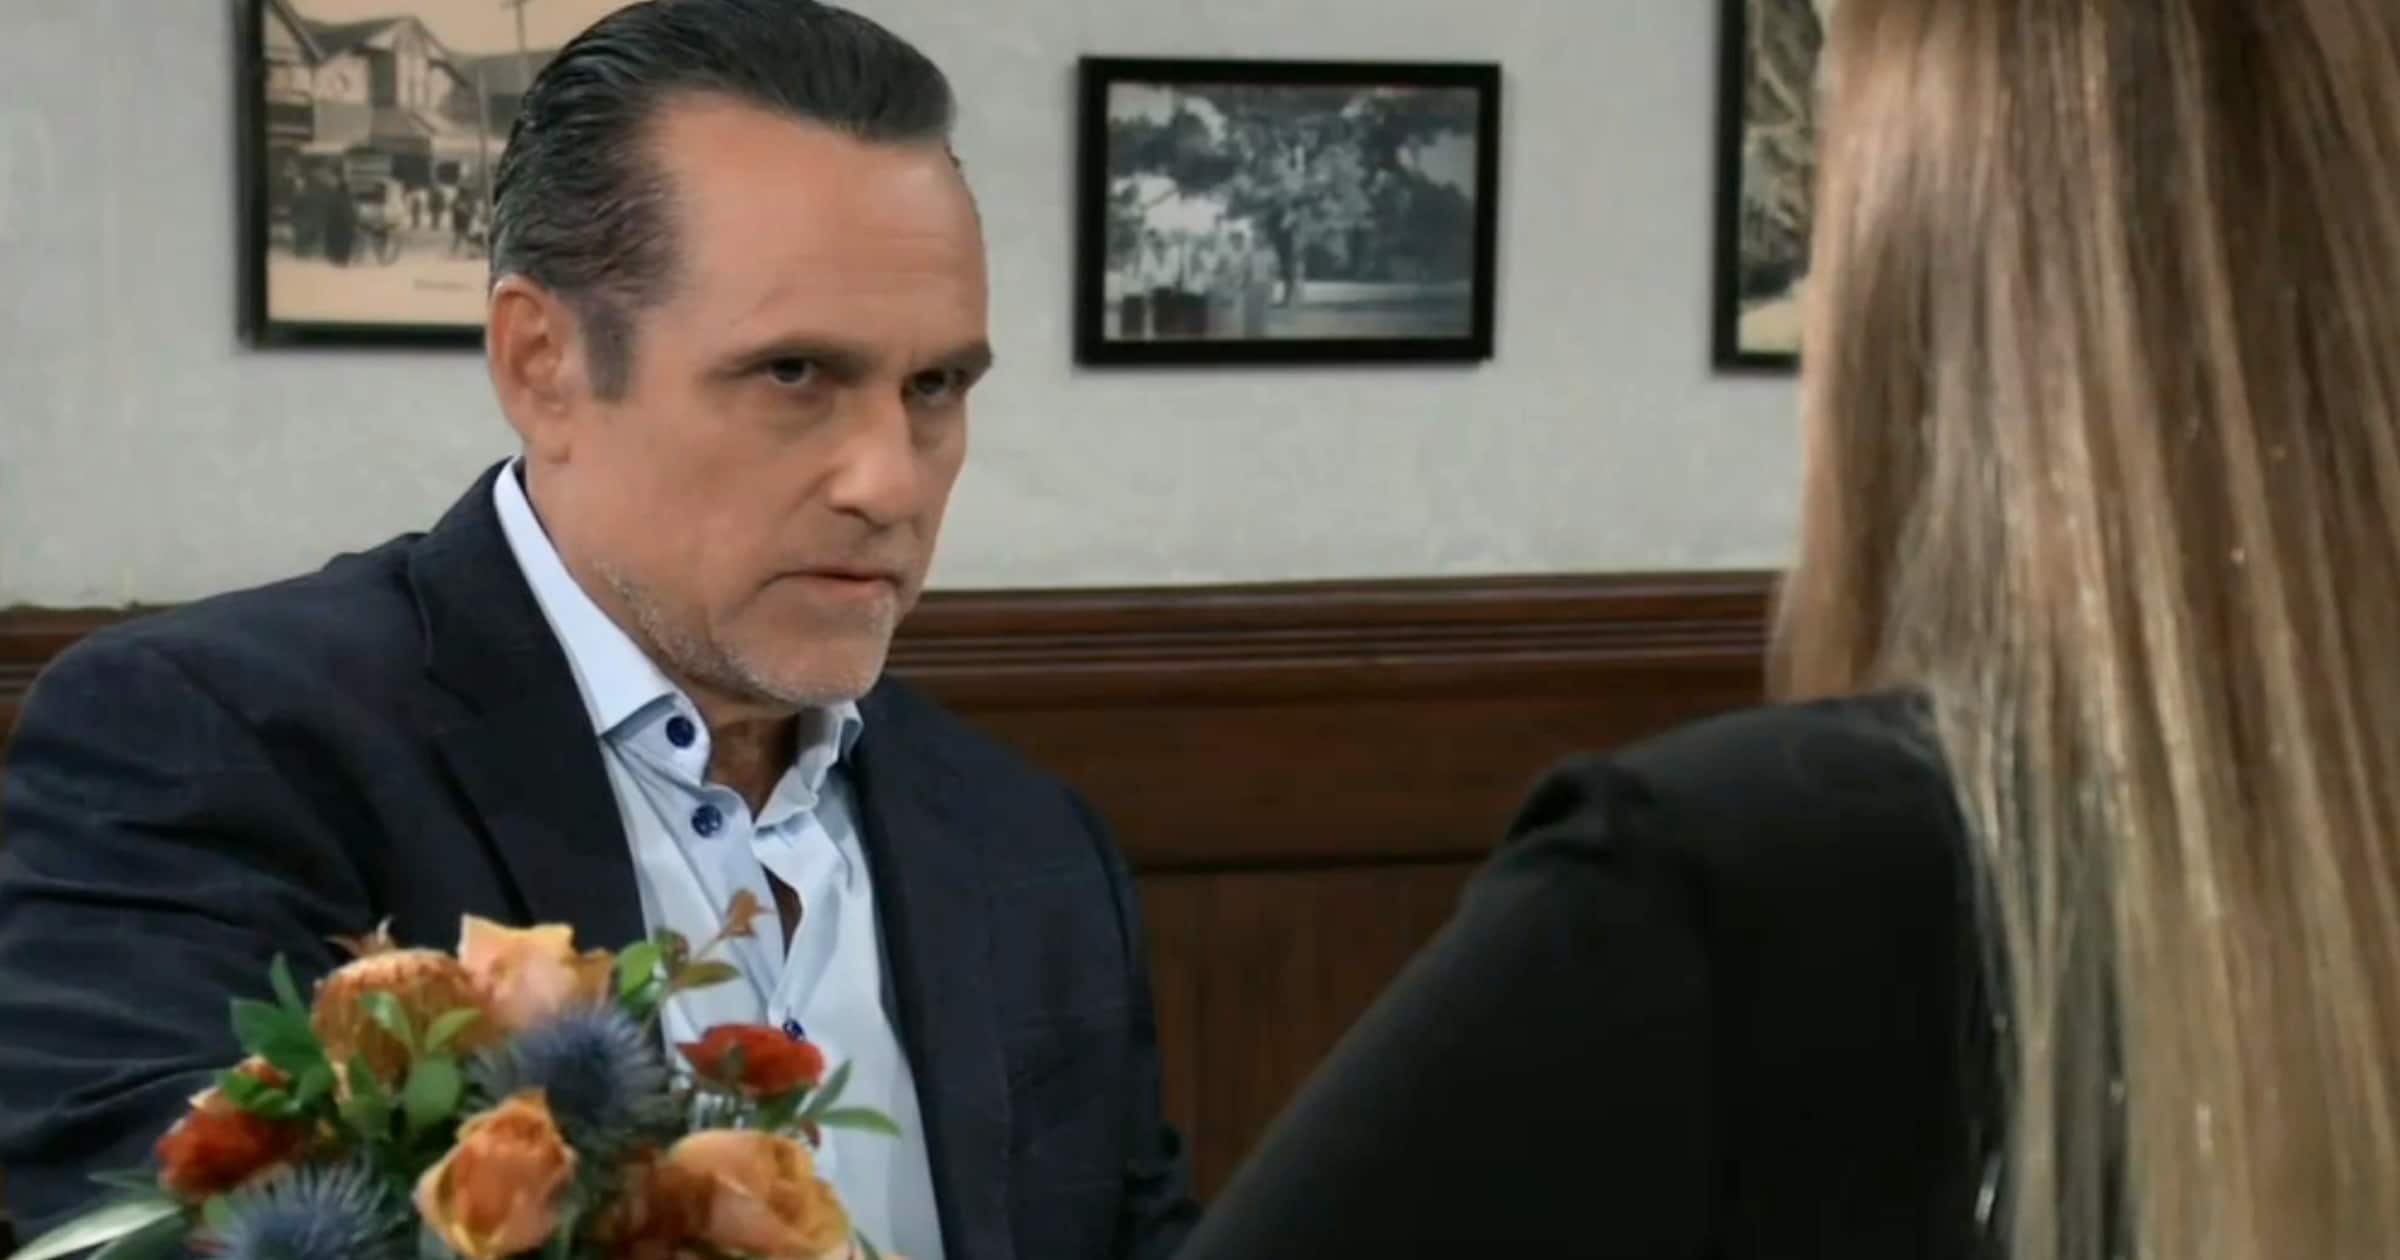 General Hospital - Oct 31 - Sonny and Laura